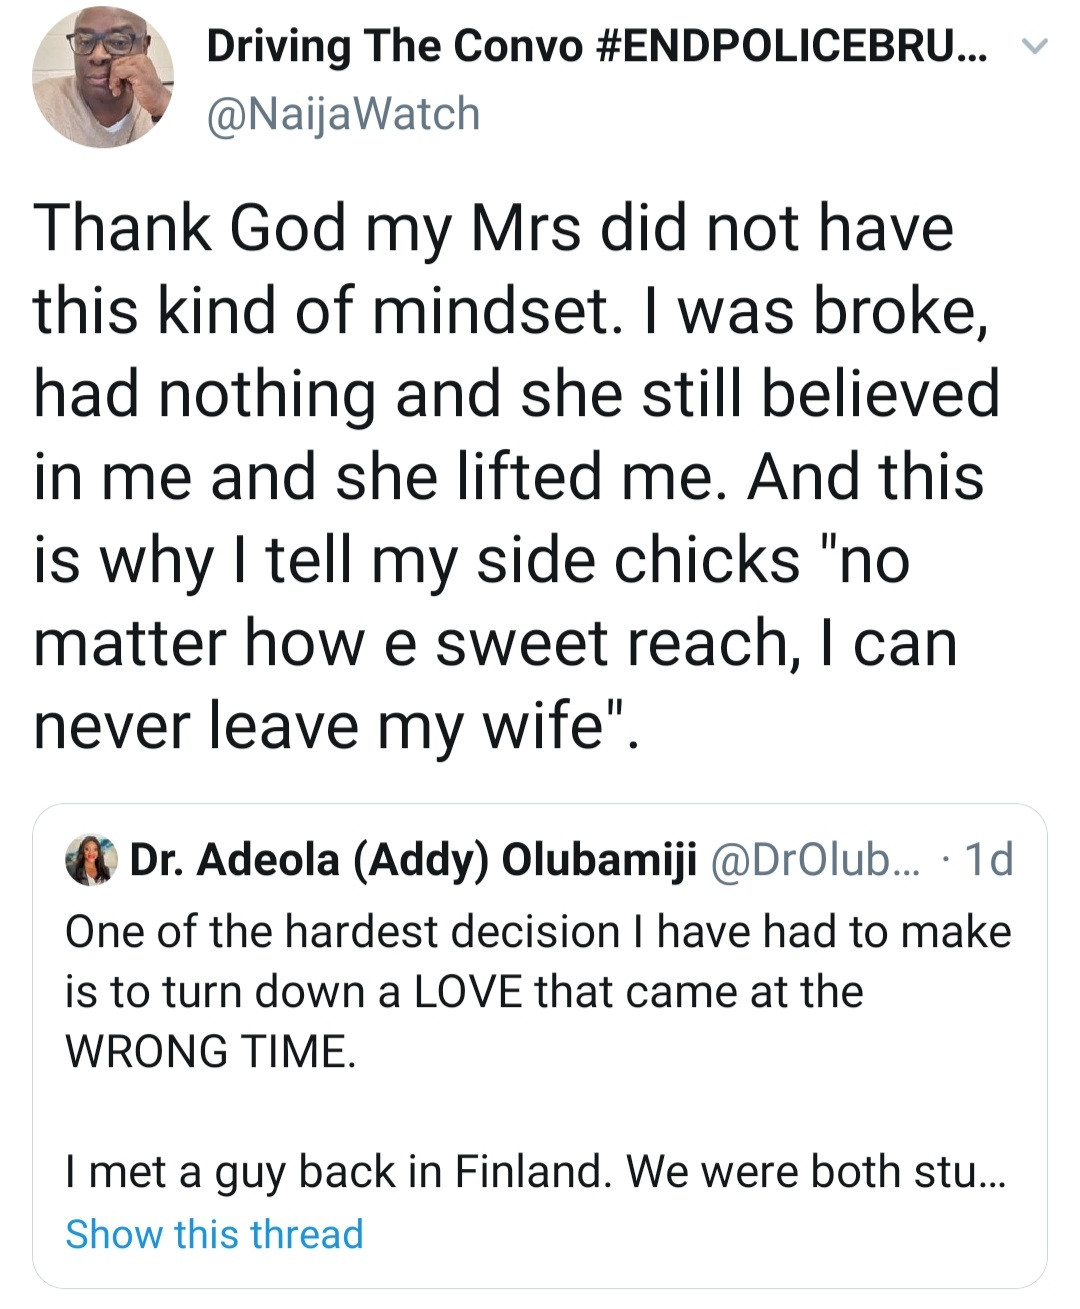 Man reveals how he rewards his wife for sticking with him when he had nothing